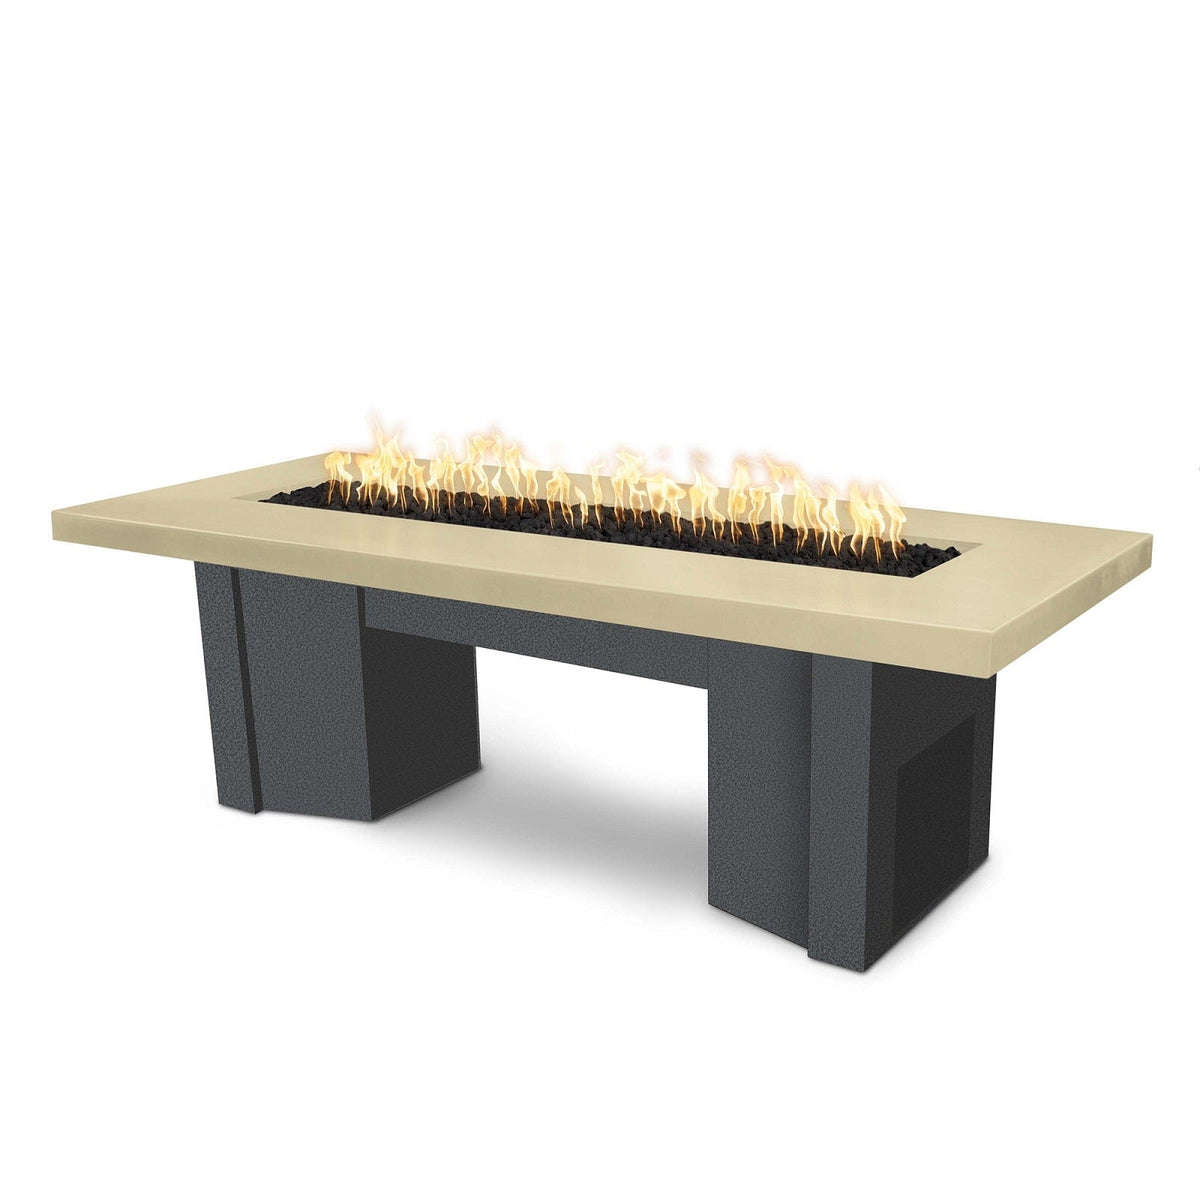 The Outdoor Plus Fire Features Vanilla (-VAN) / Silver Vein Powder Coated Steel (-SLV) The Outdoor Plus 60&quot; Alameda Fire Table Smooth Concrete in Natural Gas - Flame Sense System with Push Button Spark Igniter / OPT-ALMGFRC60FSEN-NG